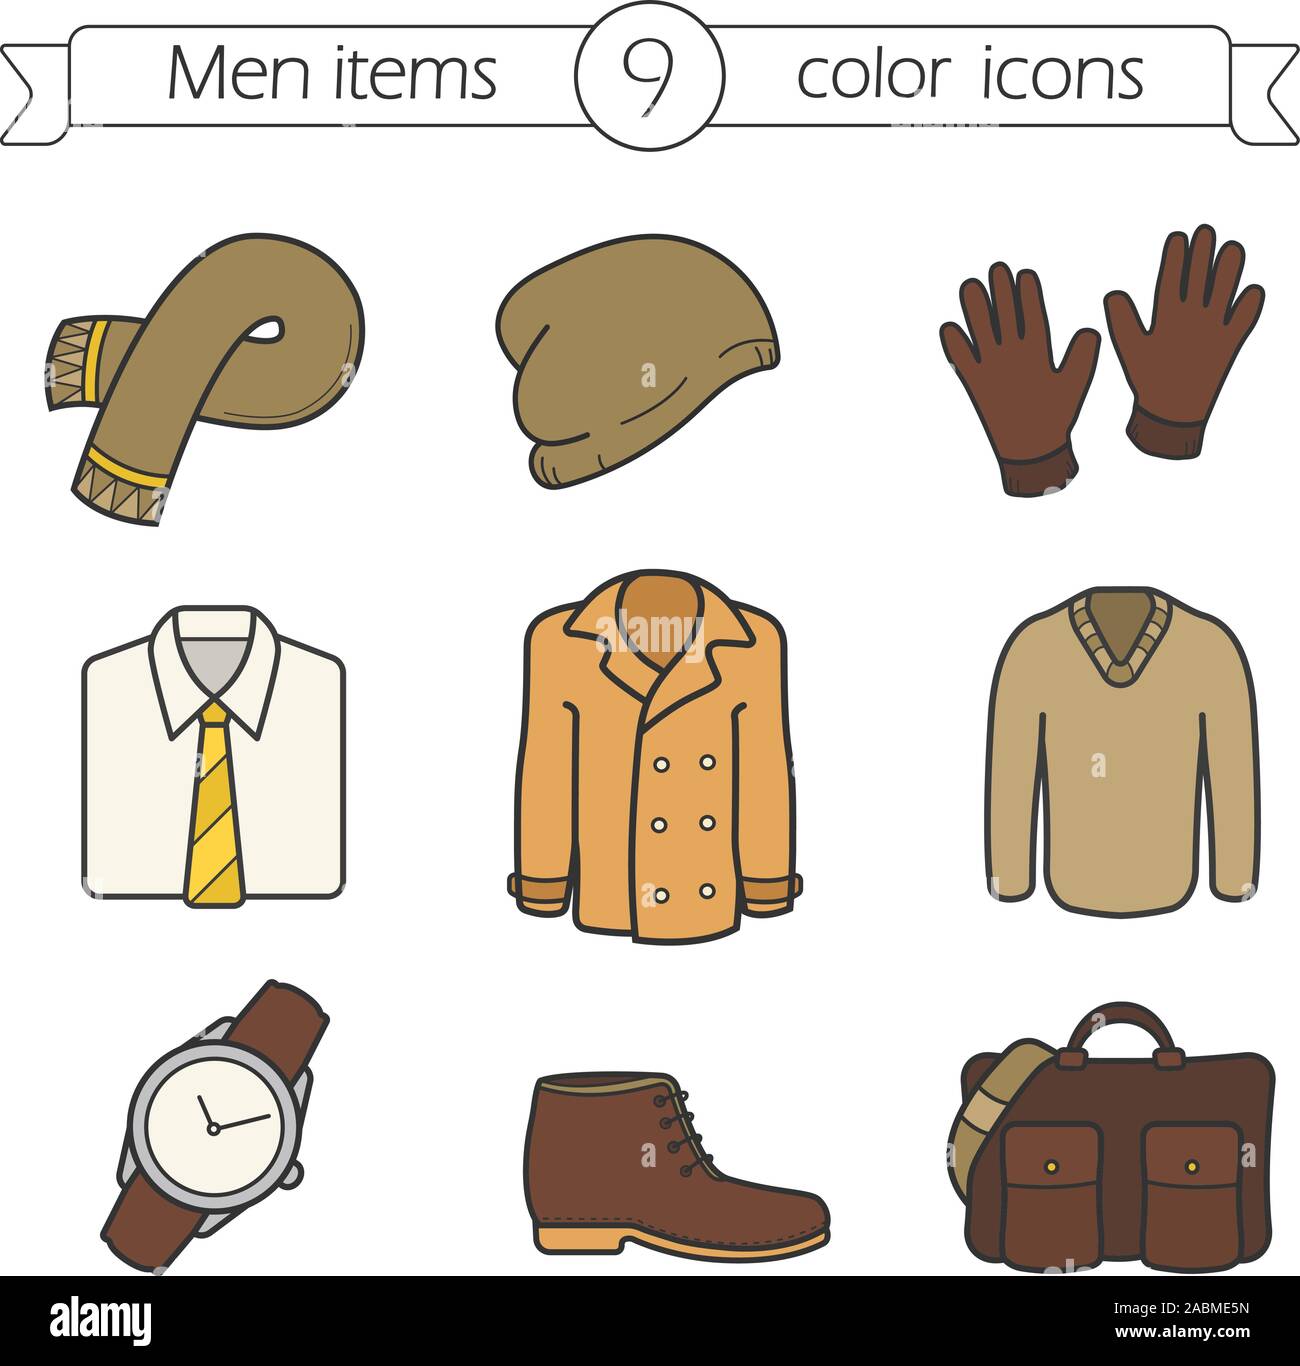 Men's accessories and clothes color icons set. Scarf, cap, gloves, shirt and tie, jacket, pullover, wristwatch, boot, bag. Autumn fashion. Isolated ve Stock Vector